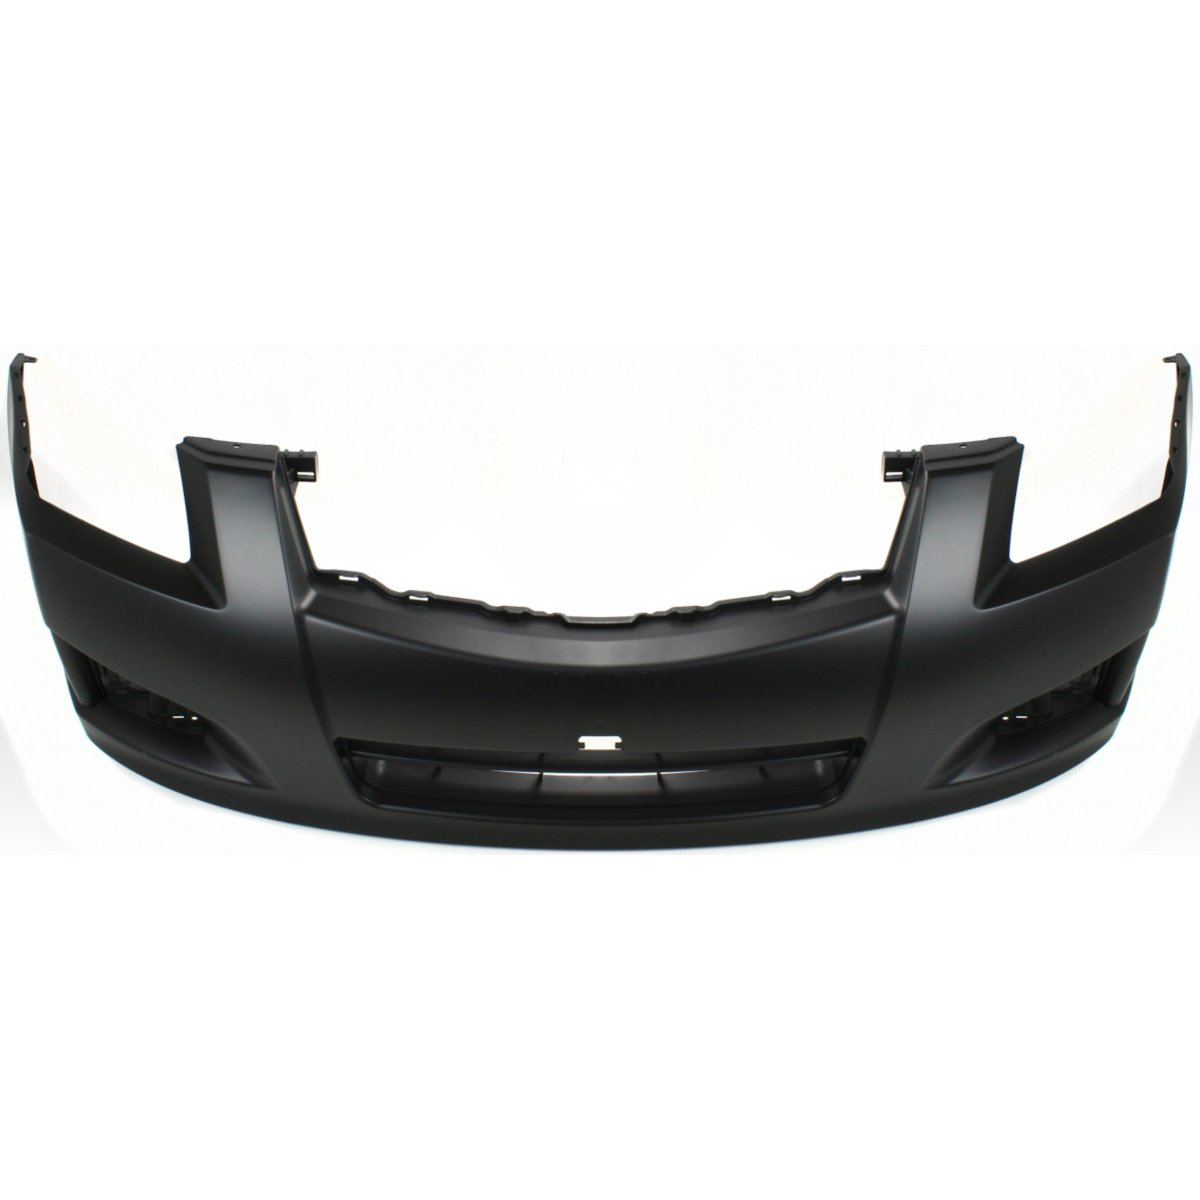 2007-2012 NISSAN SENTRA Front Bumper Cover 2.5L Painted to Match